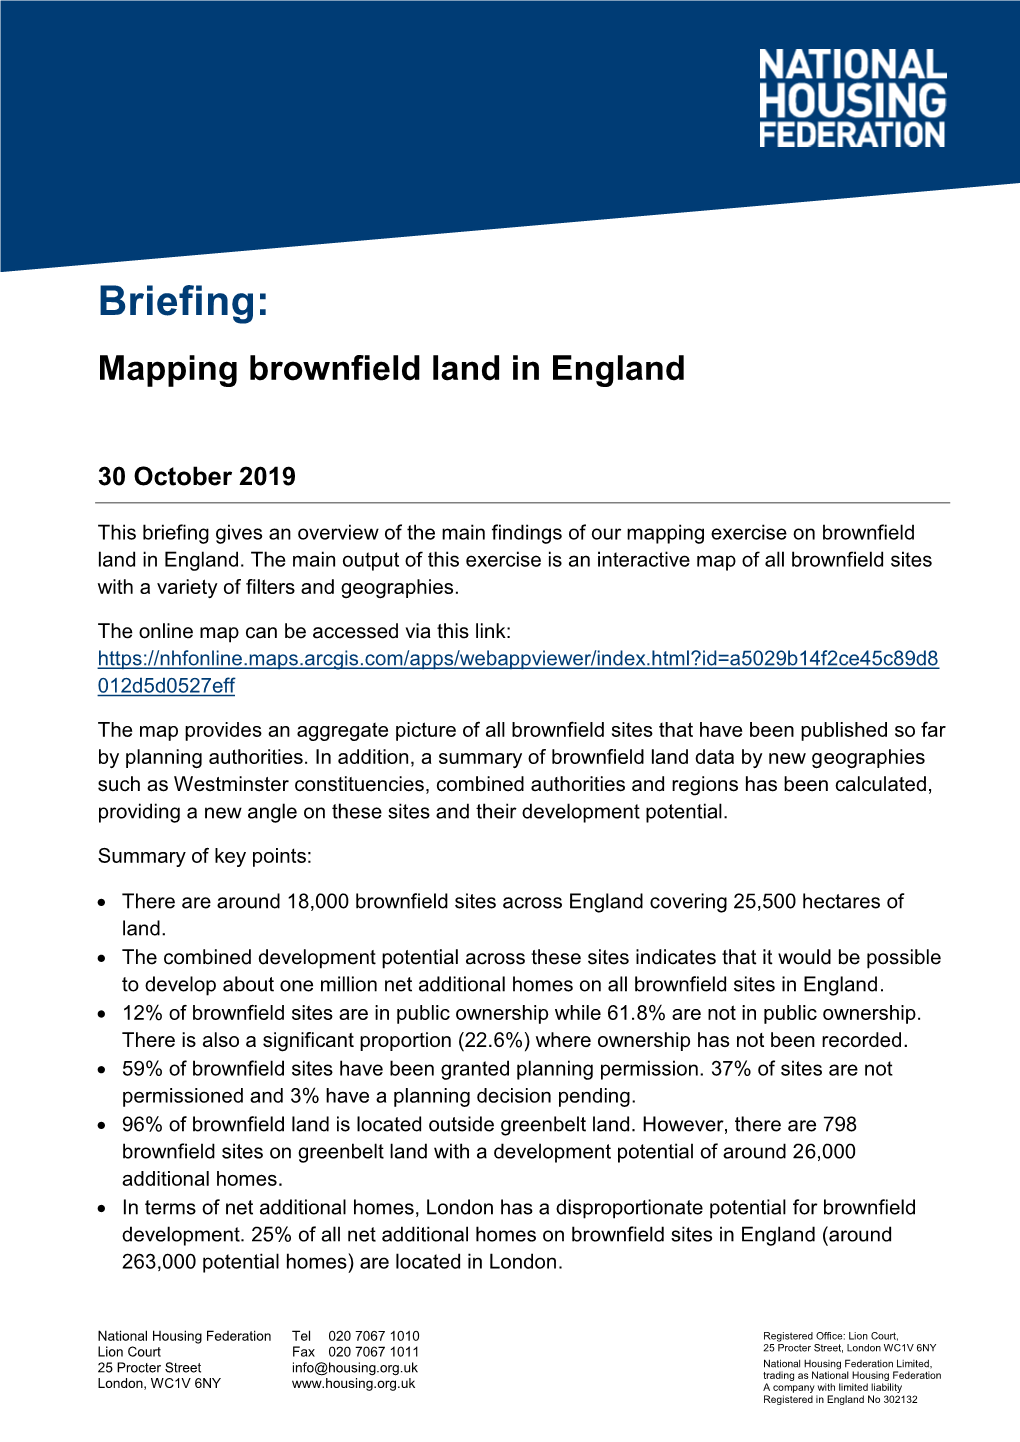 Briefing: Mapping Brownfield Land in England